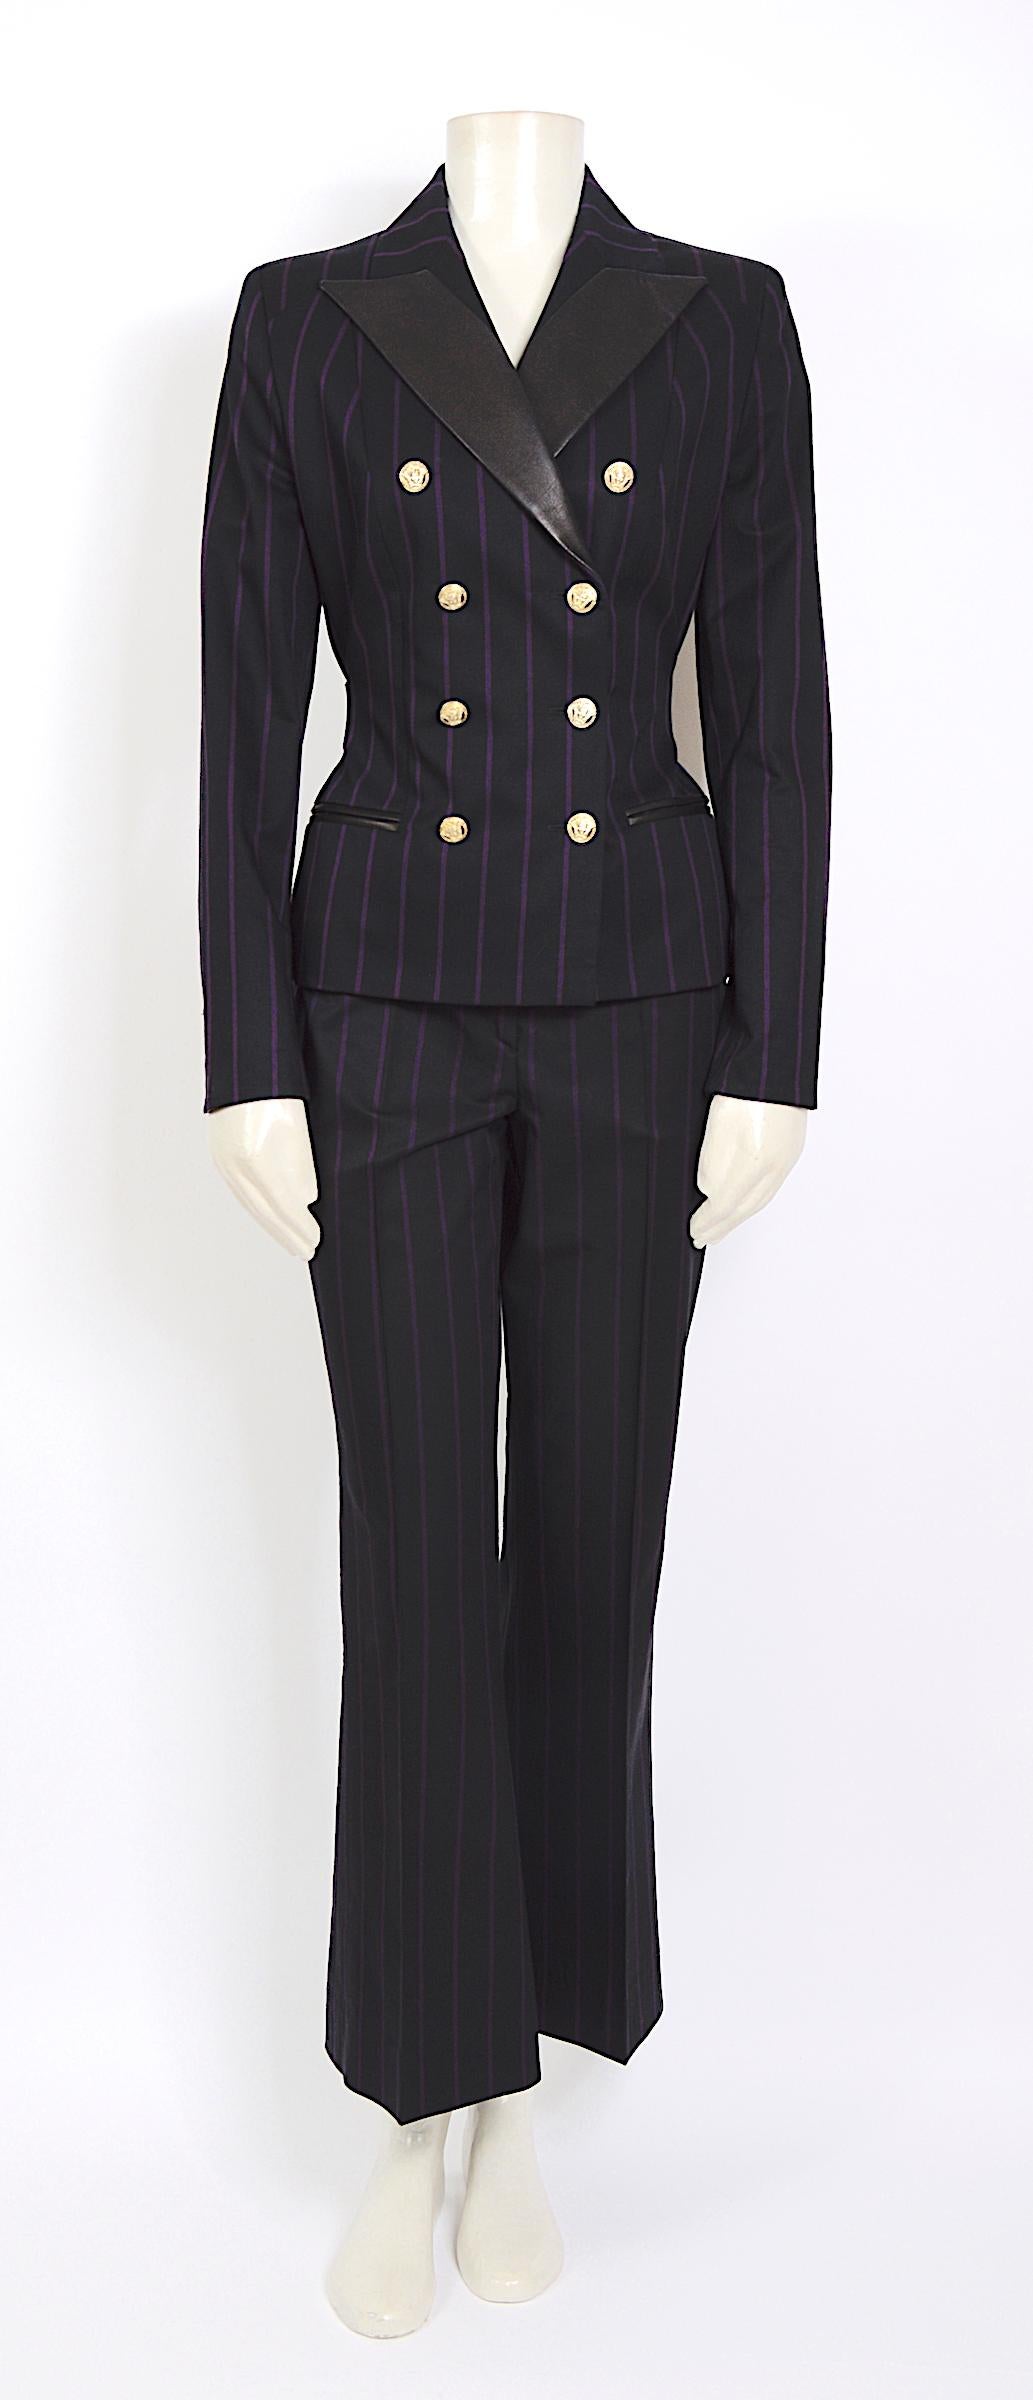 Vintage 1990s Gianni Versace purple striped black suit. made in a mix of 57% wool 42% silk & 2% elastane and leather details at the back/sleeves/collar and the waistband of the trousers The leather backstrap was pinned on the doll for a more fitted